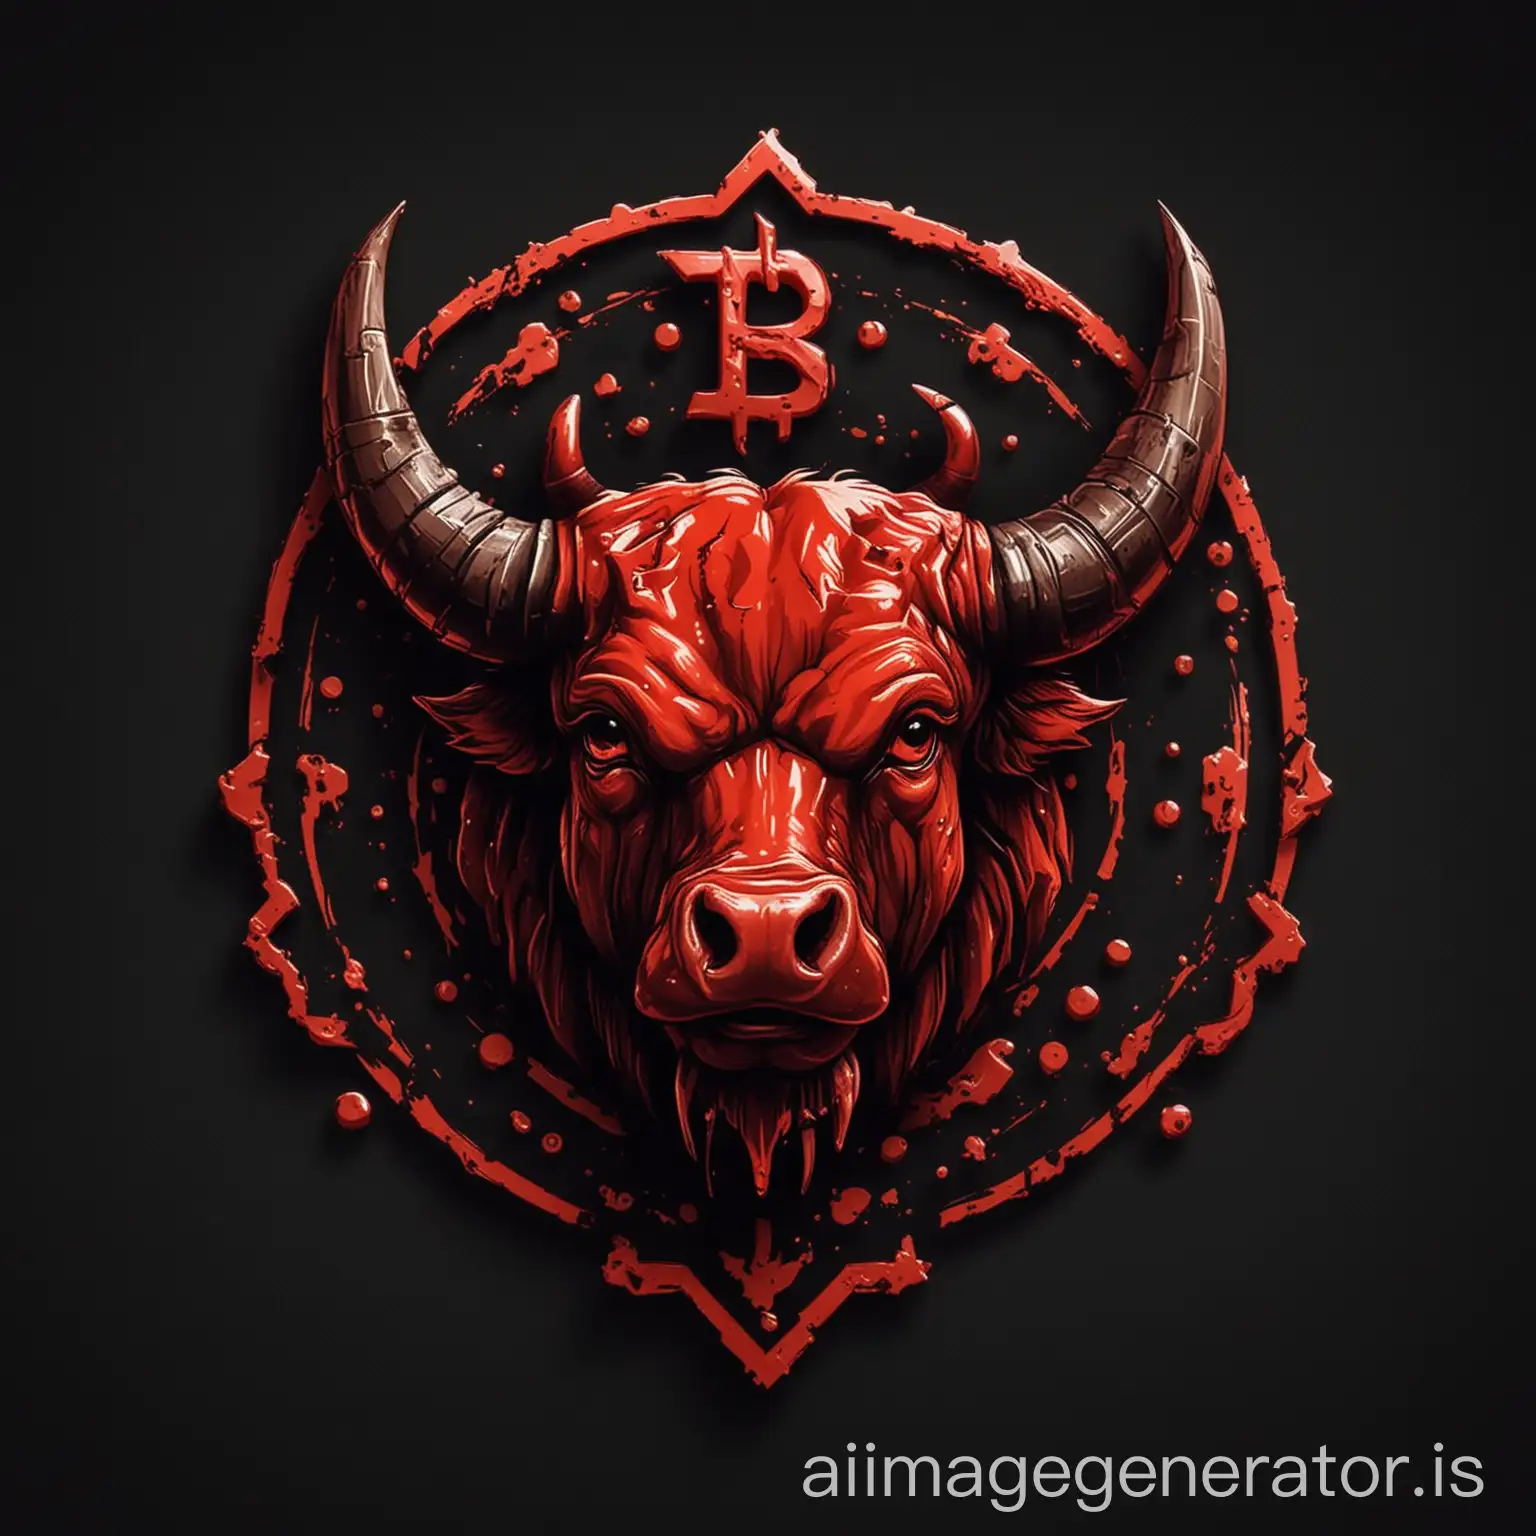 Cryptocurrency-and-Blood-Bull-Logo-Design-Futuristic-Symbolism-of-Finance-and-Power